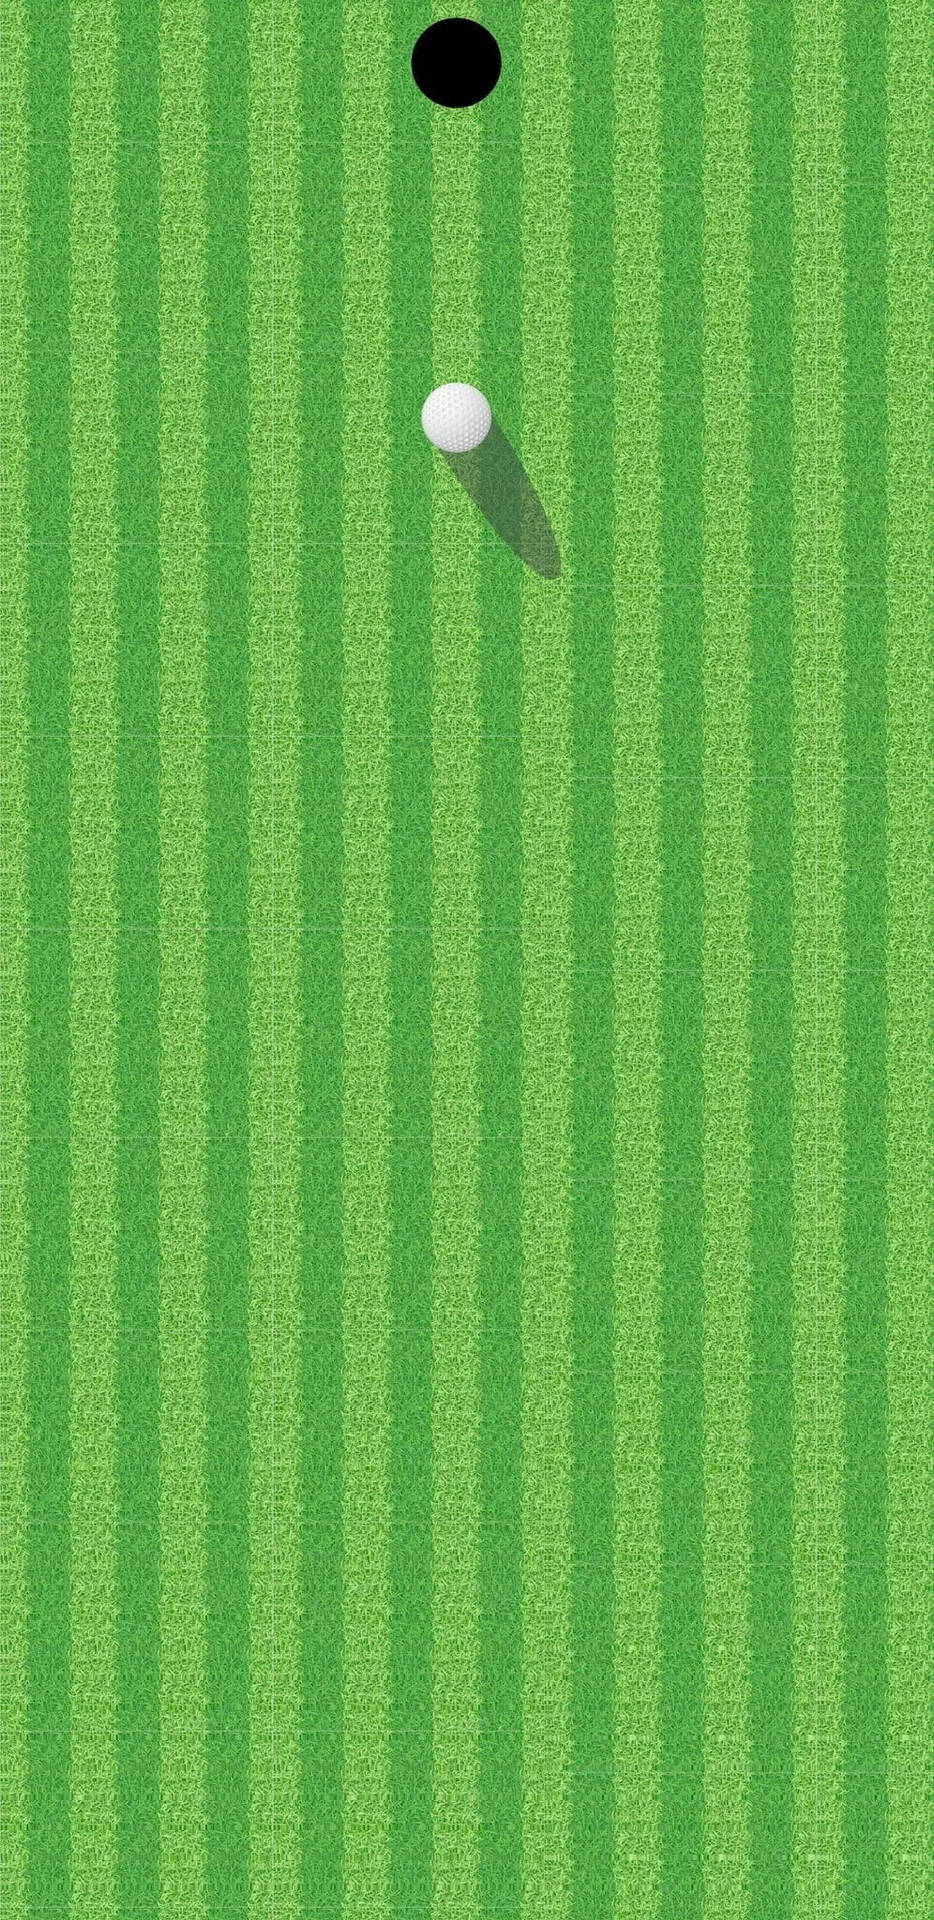 Golf Middle Punch Hole Background